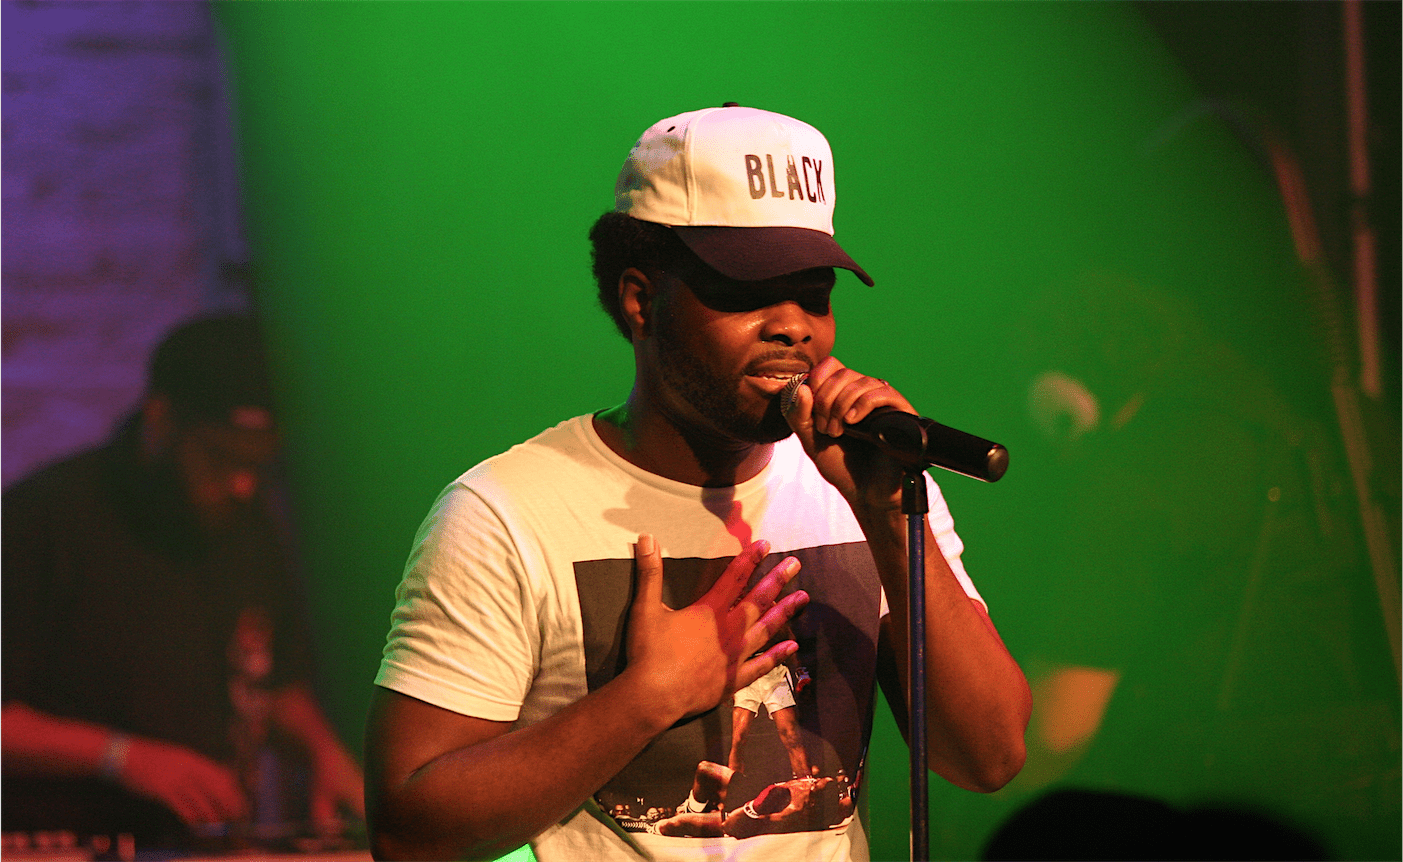 A man in a white hat singing into a microphone. - Chance the Rapper